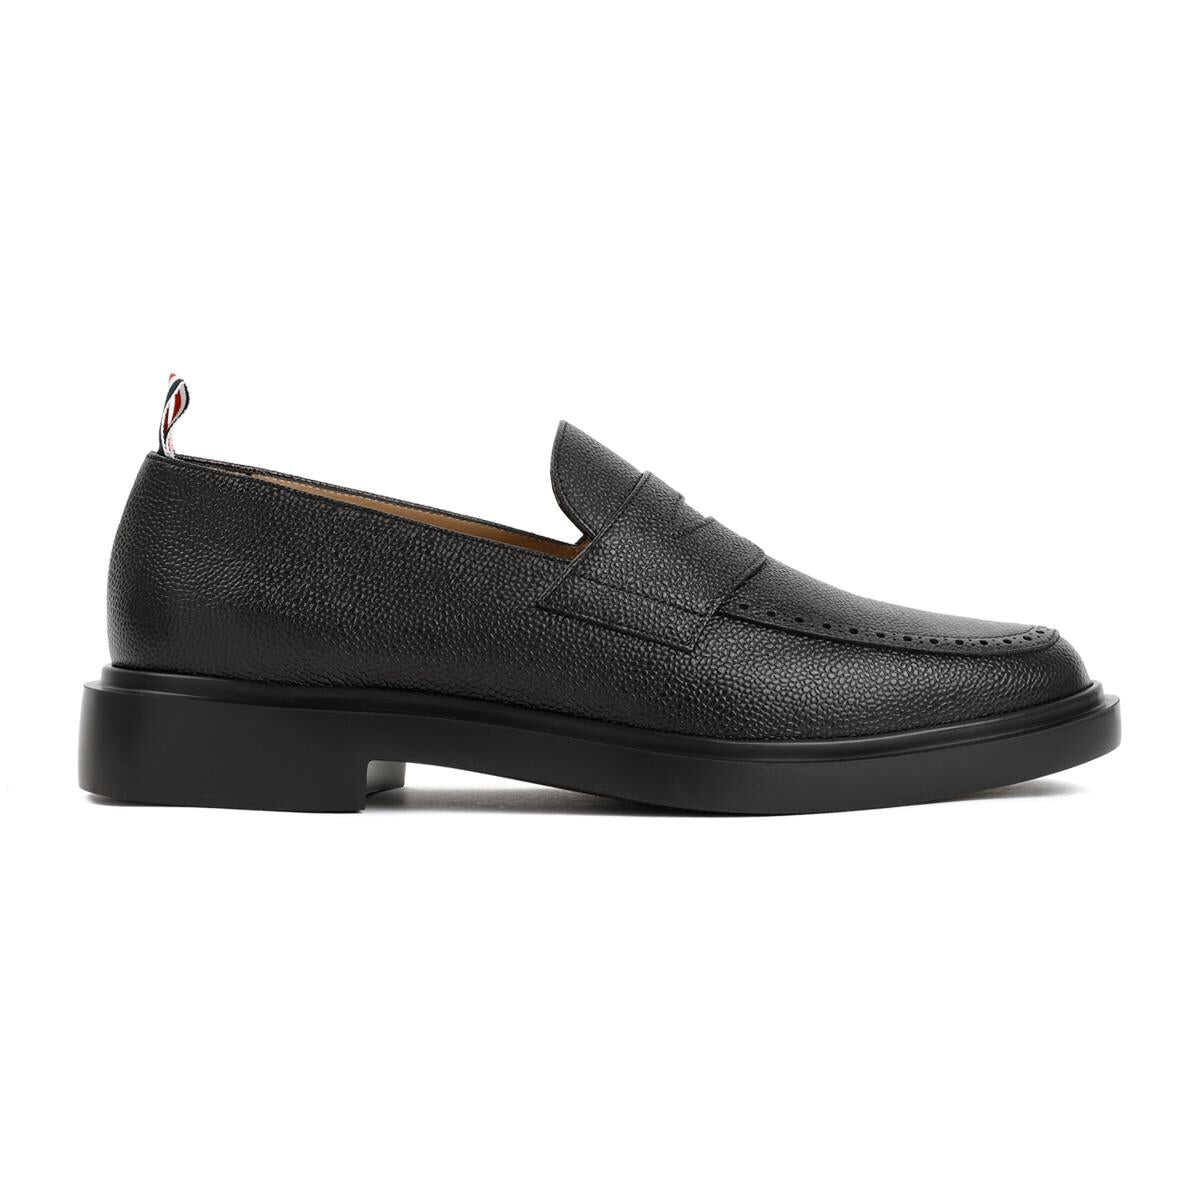 Thom Browne THOM BROWNE PENNY LOAFER SHOES BLACK